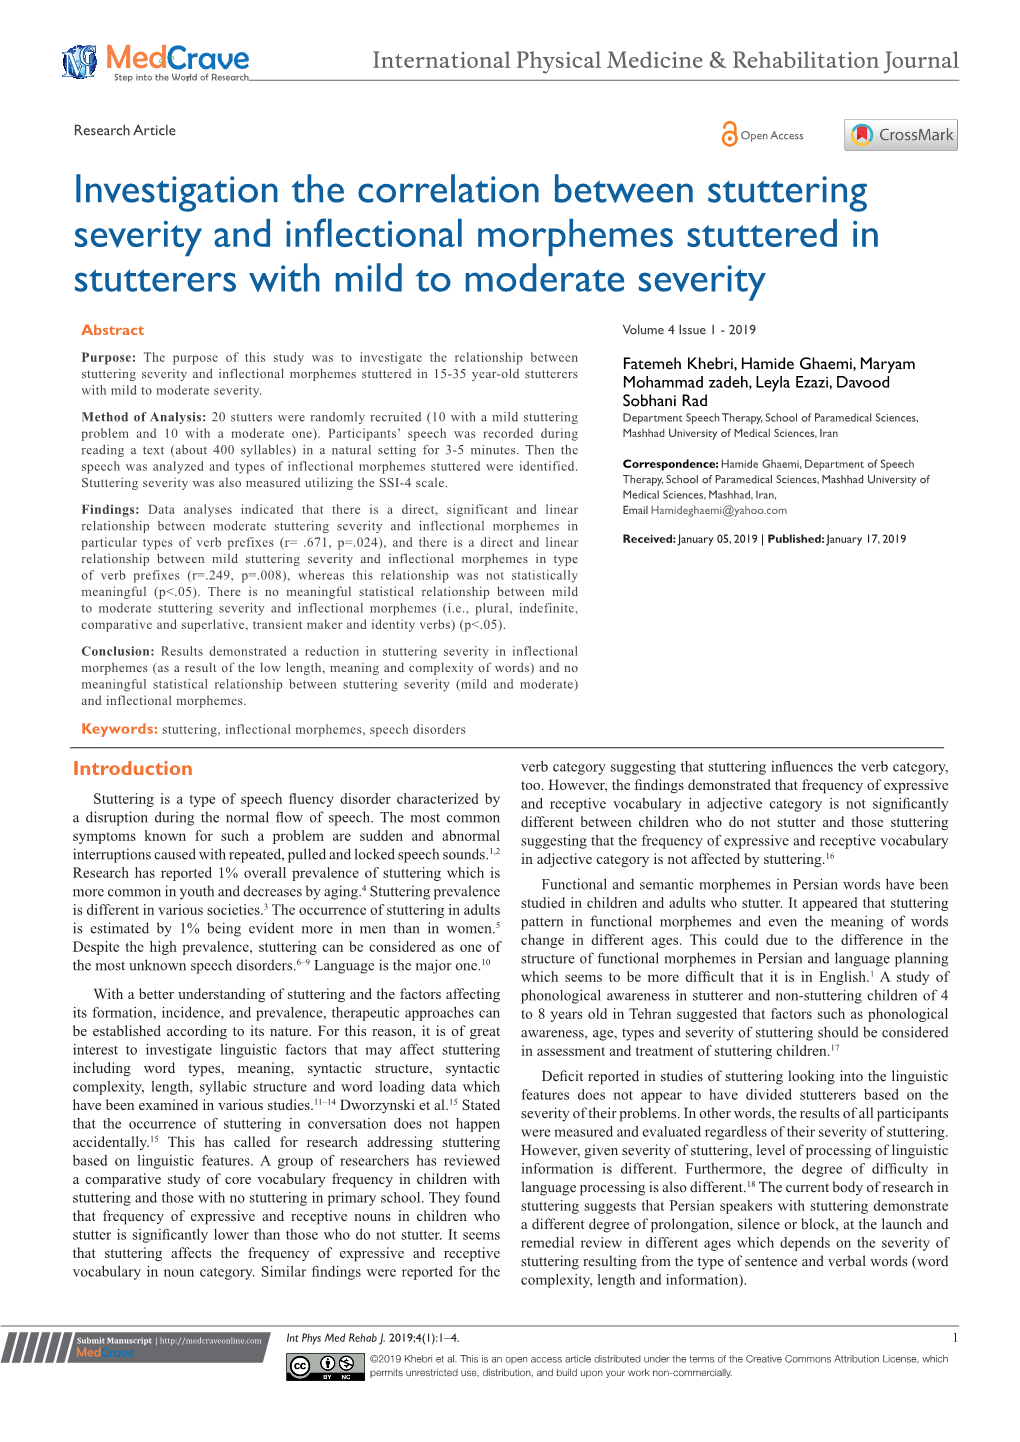 Investigation the Correlation Between Stuttering Severity and Inflectional Morphemes Stuttered in Stutterers with Mild to Moderate Severity